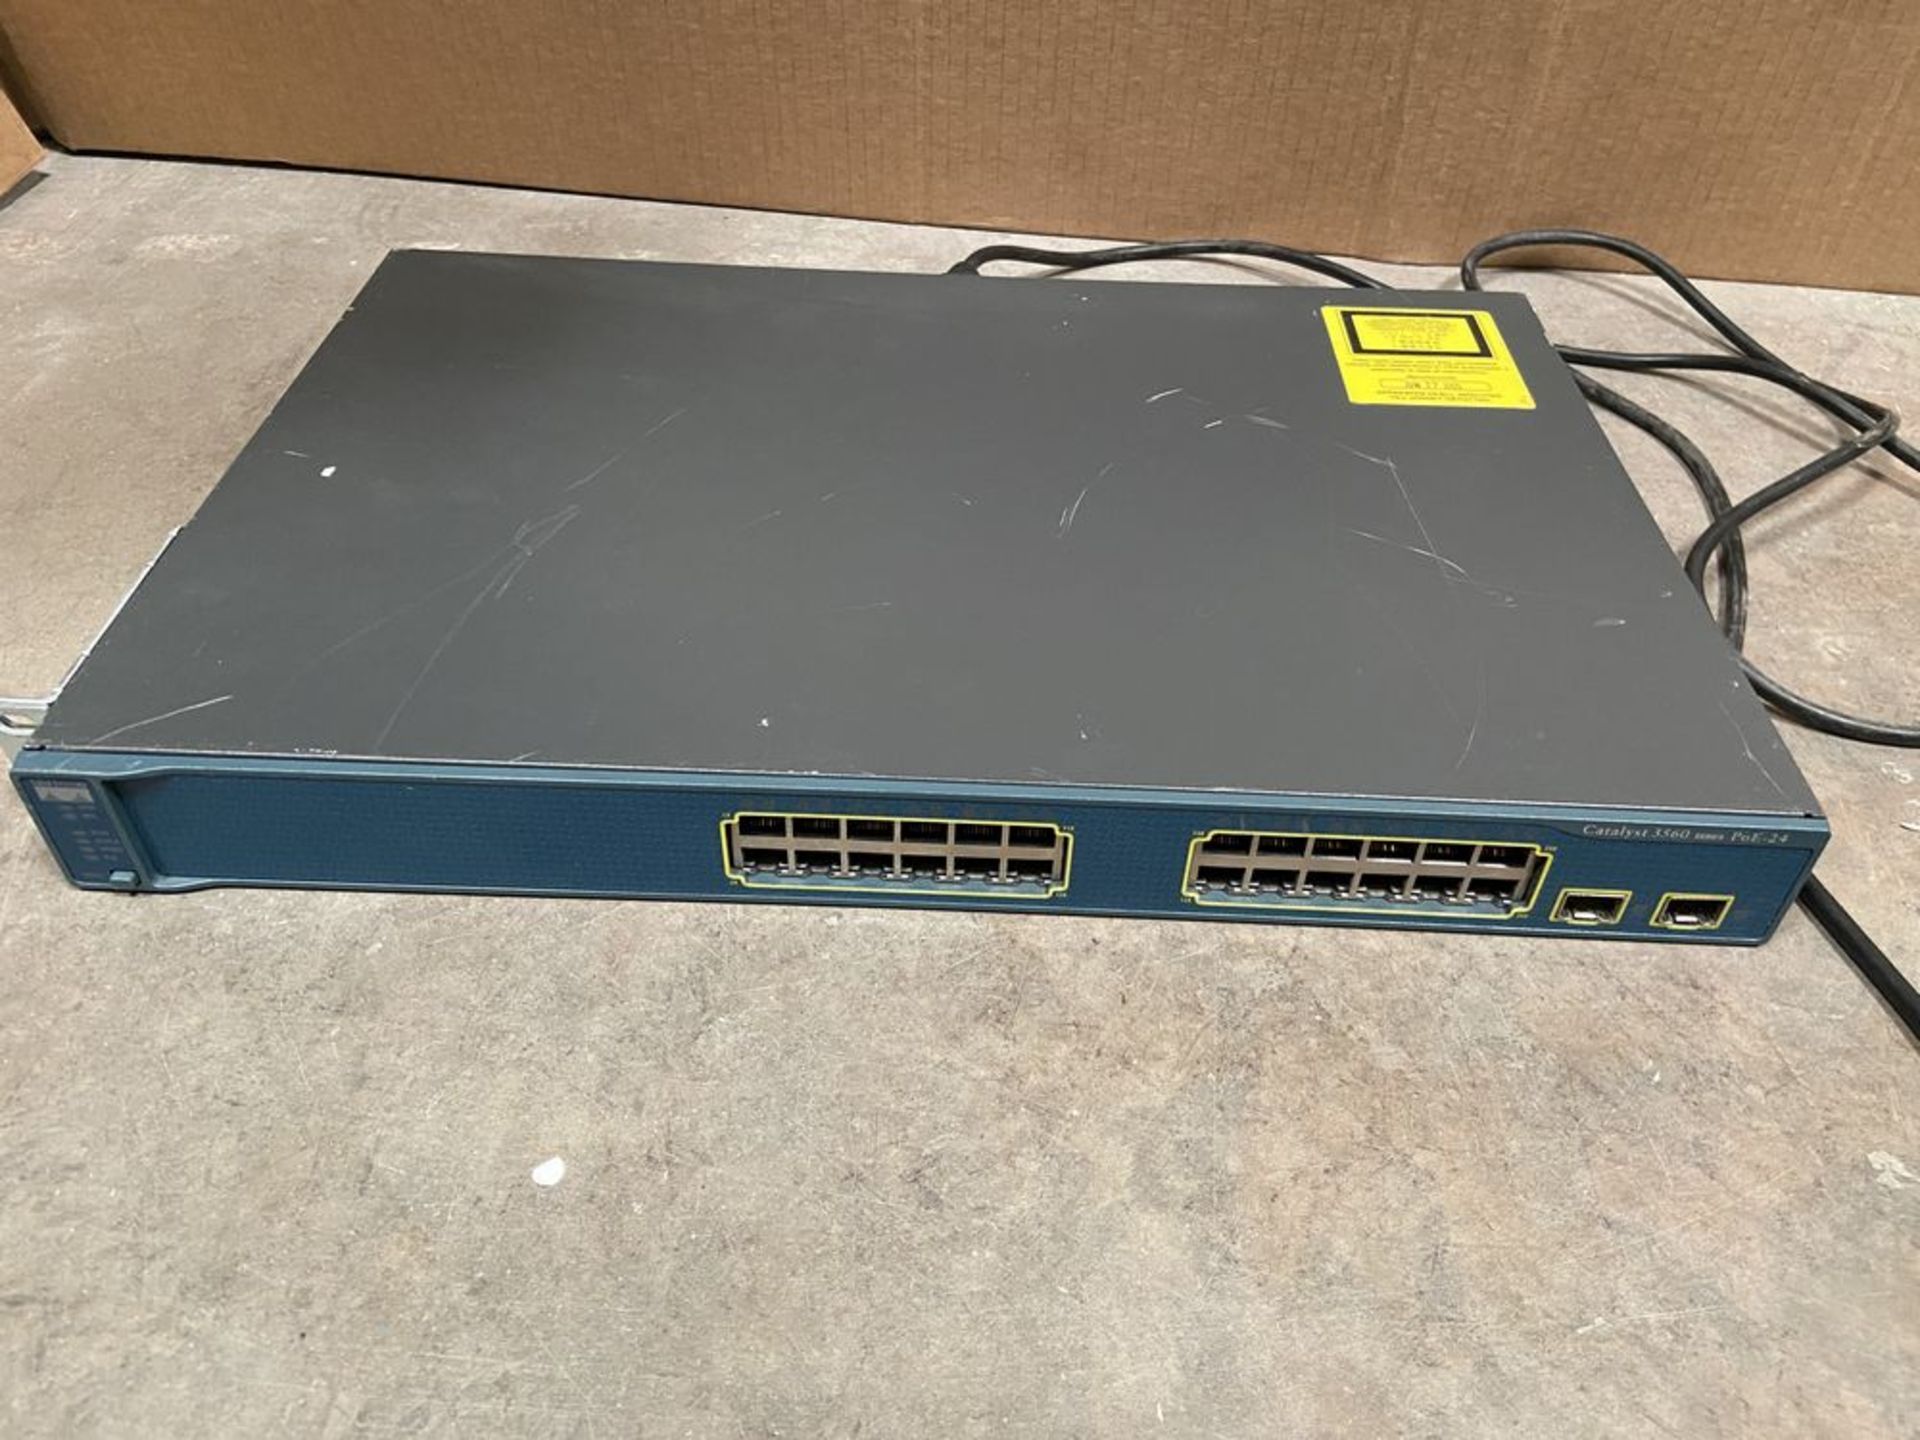 Catalyst 3560 Series PoE-24 Networking Equipment Switch/WS-C3560-24PS-S